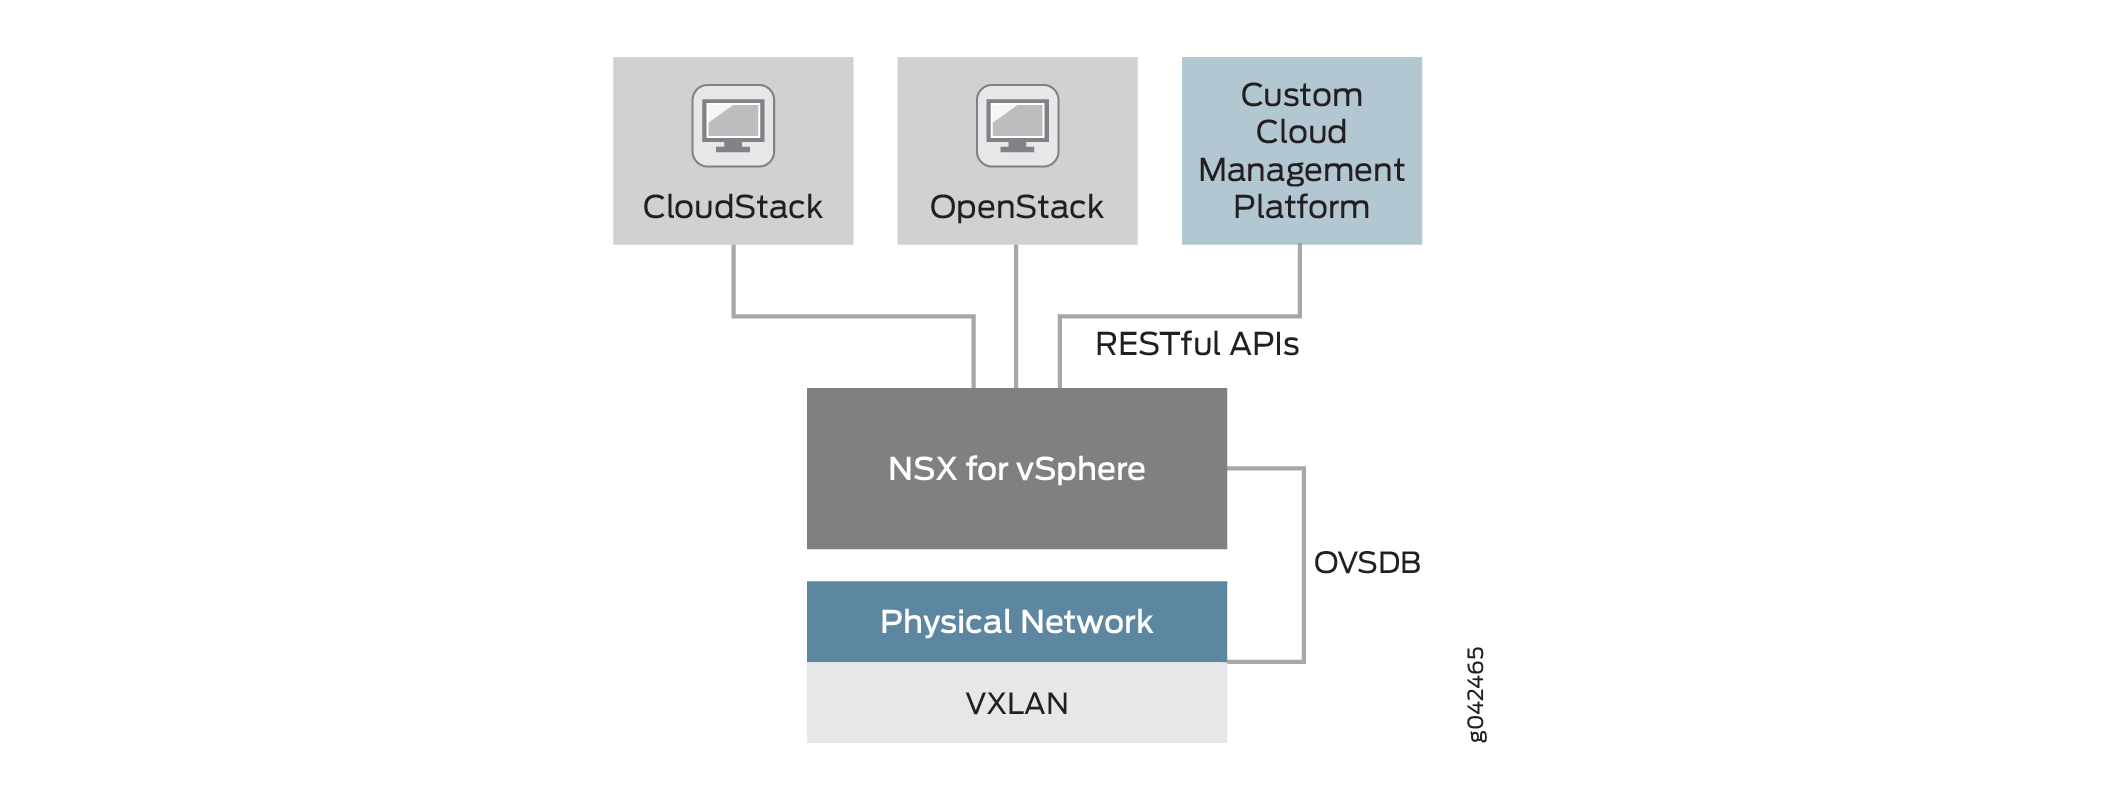 High-Level View of NSX for vSphere Architecture